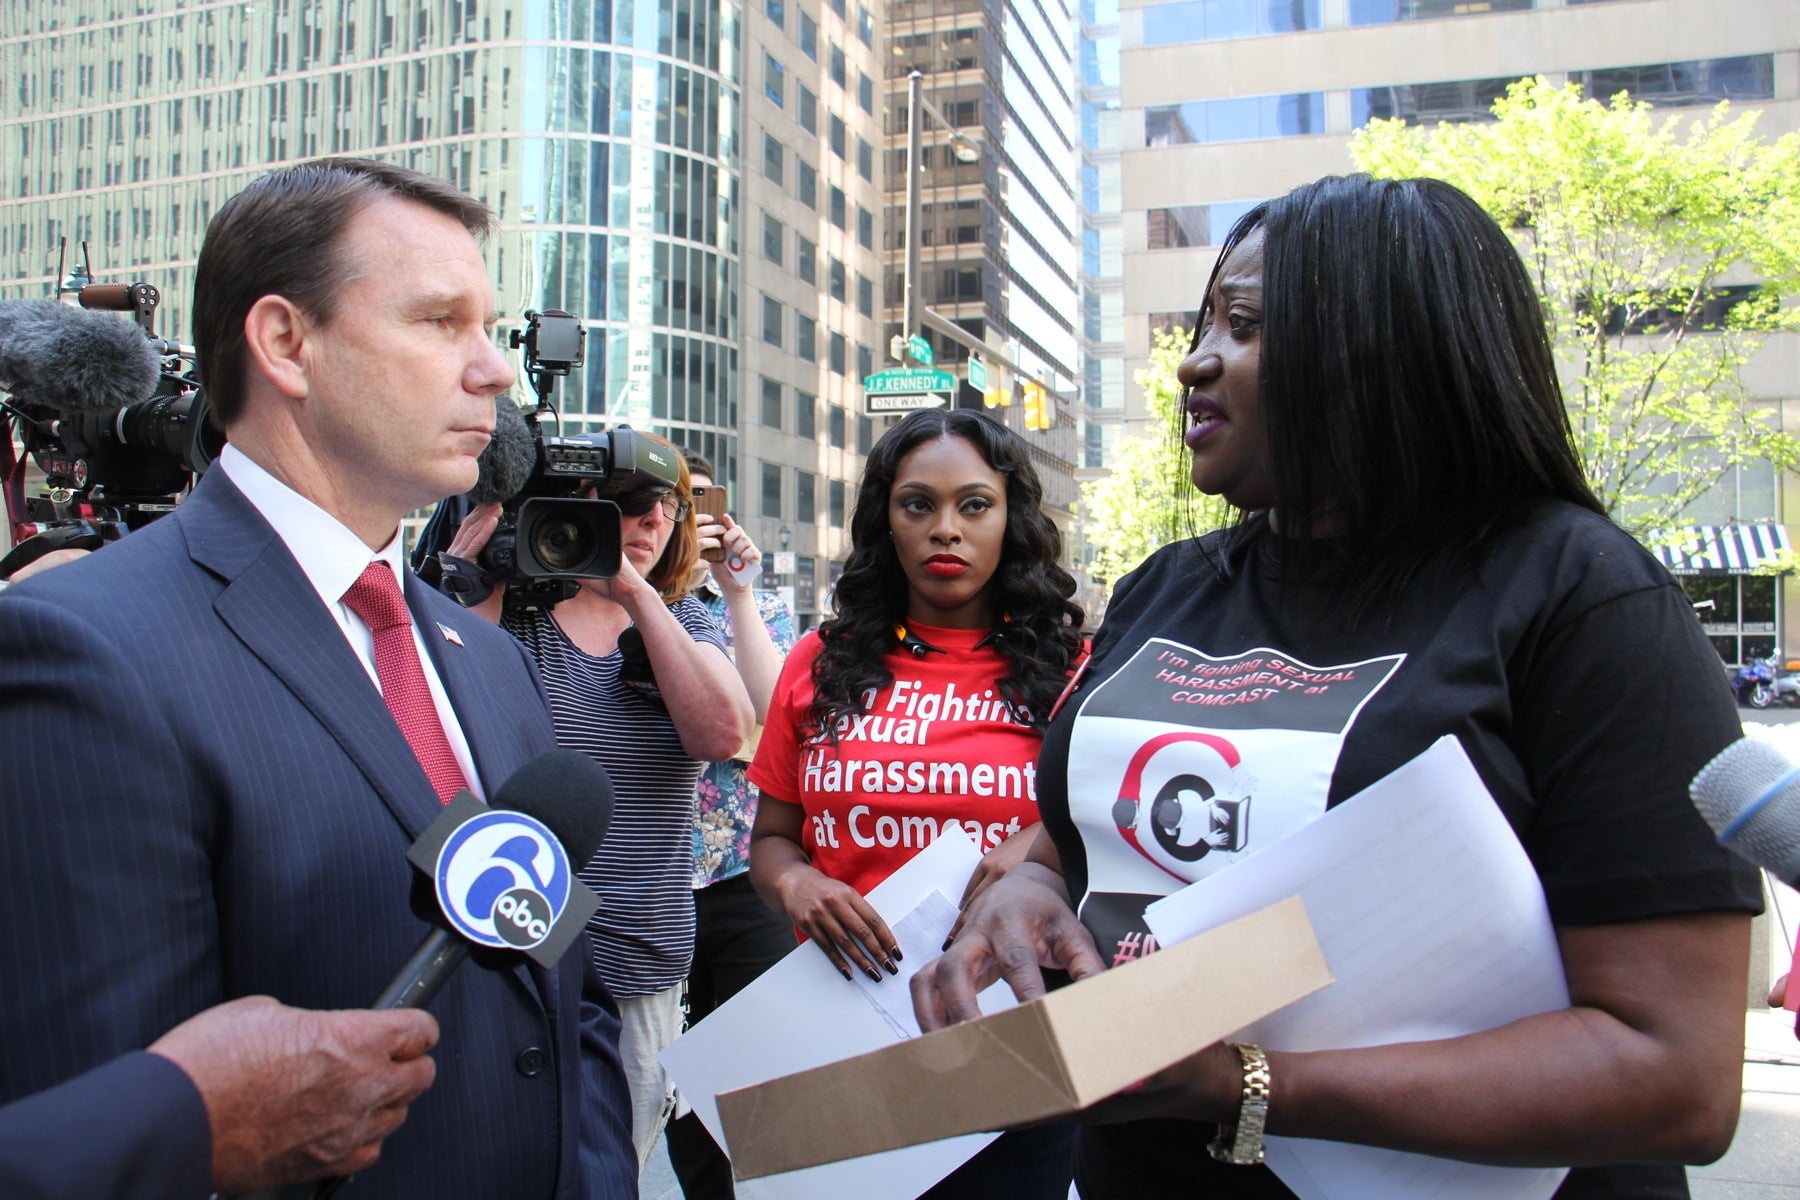 Rylinda Rhodes (right) is stopped by security as she attempts to deliver a petition to the Comcast human resourses department. Rhodes has filed a claim that she was sexually harrassed during the three years she worked as a call center in Maryland.